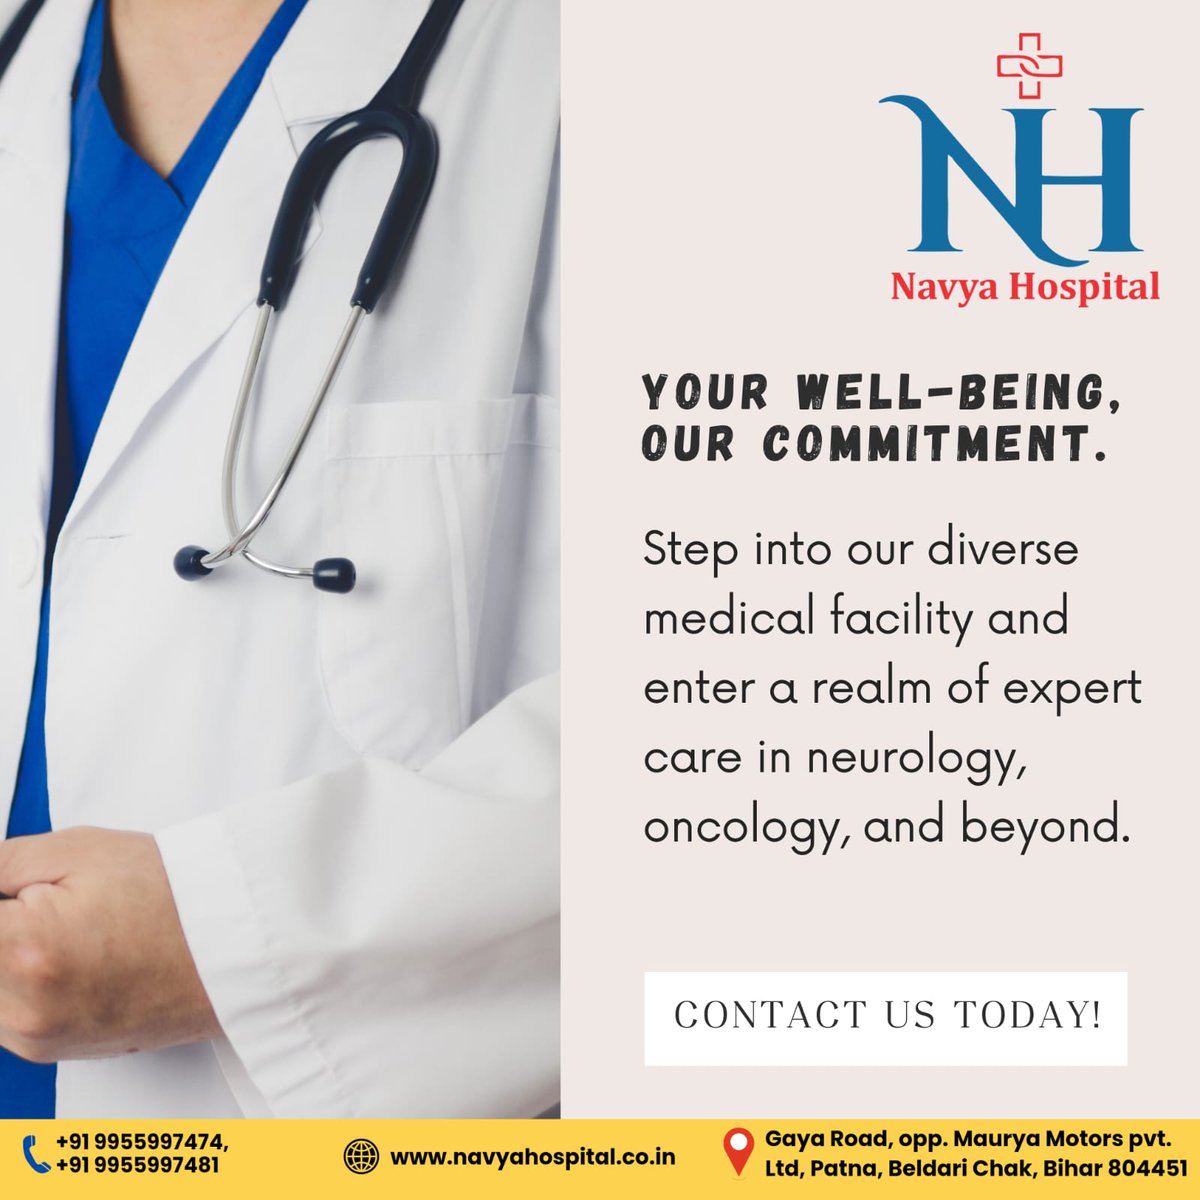 Follow us @navyacares

#YourWellBeing #OurCommitment #ExpertCare #MedicalFacility #NeurologyCare #OncologyExperts #BeyondHealth #HealthcareExcellence #SpecializedCare #MedicalExpertise #navyahospital #health #emergency #patna #EmergencyCare #Healthcare #hospitals